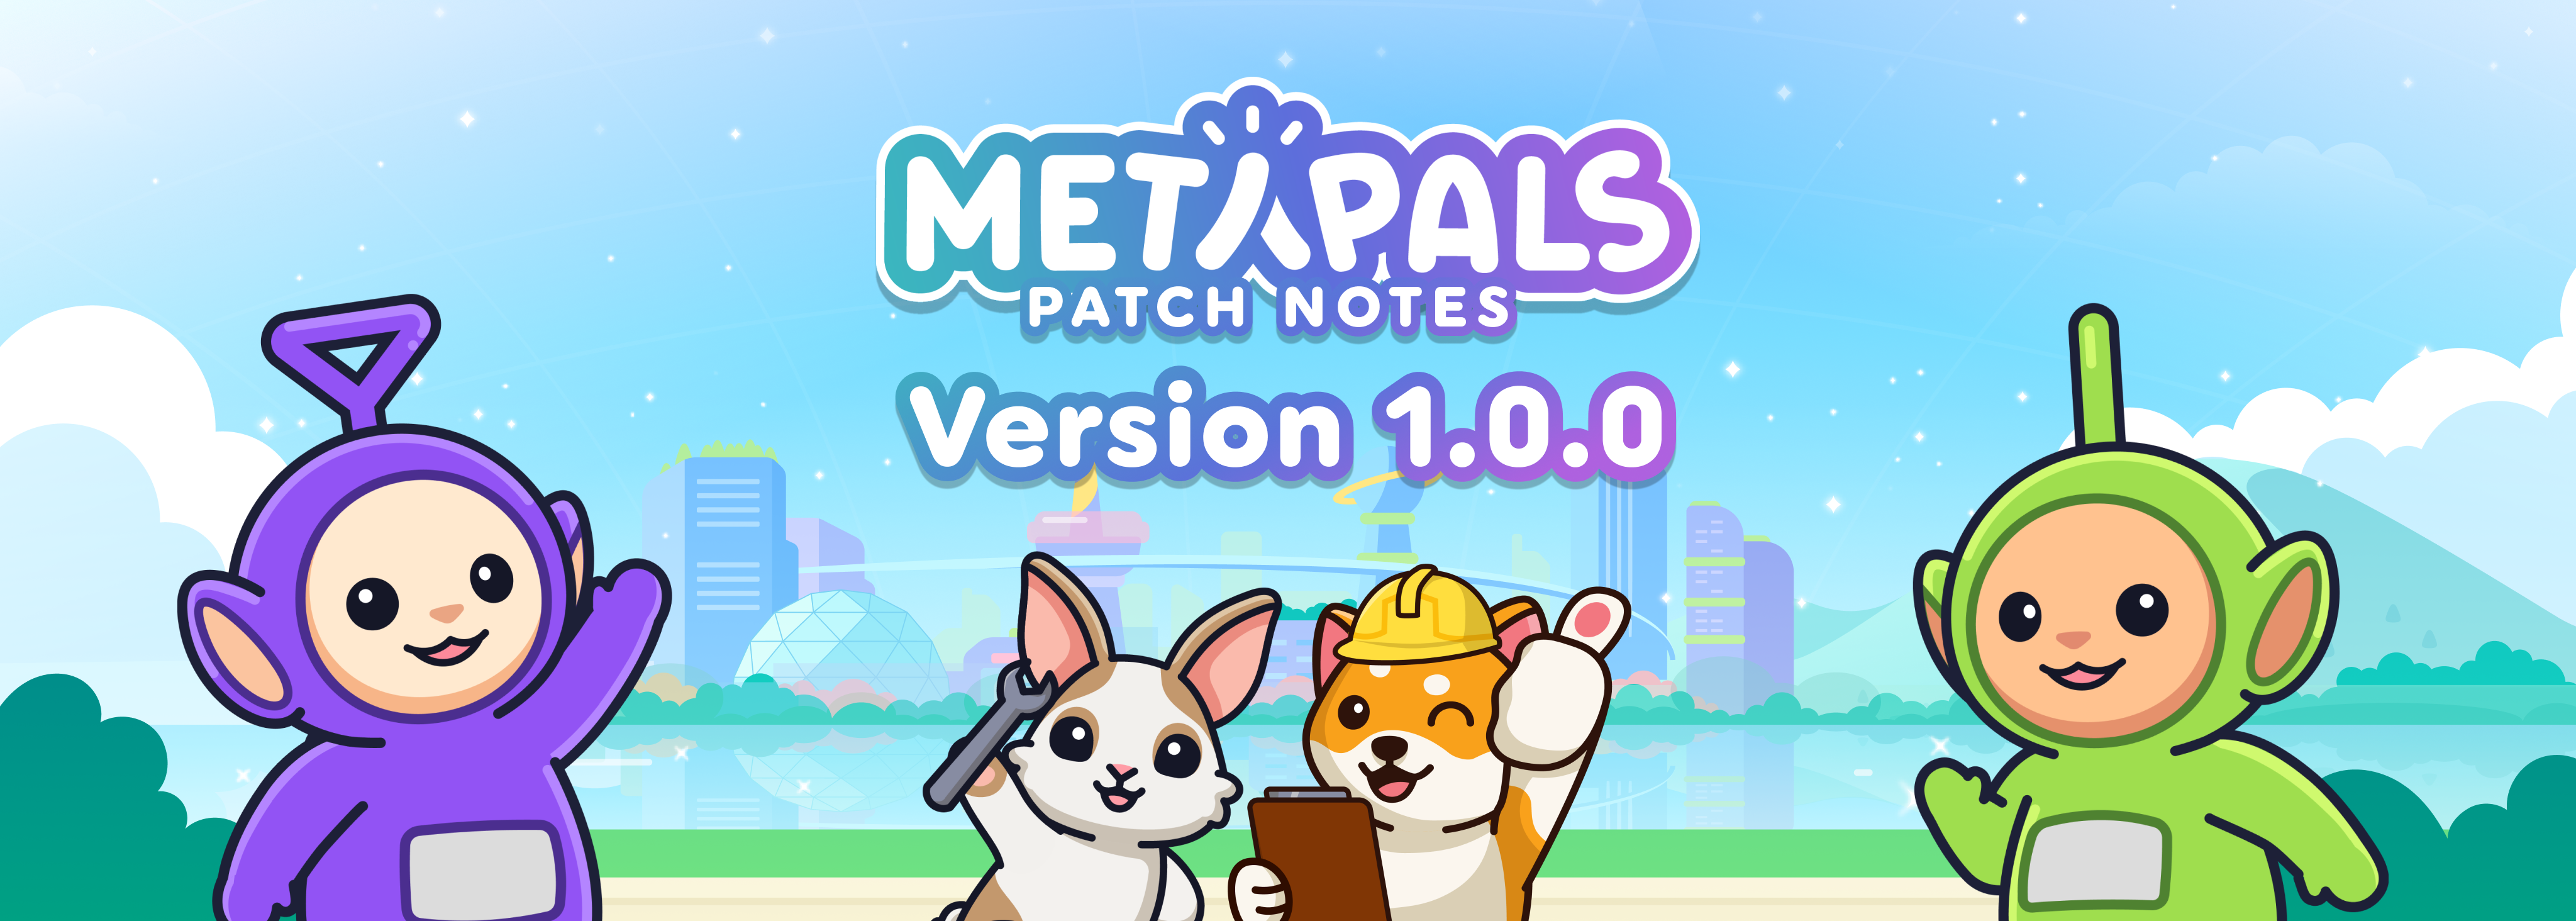 Version 1.0.0 Patch Notes